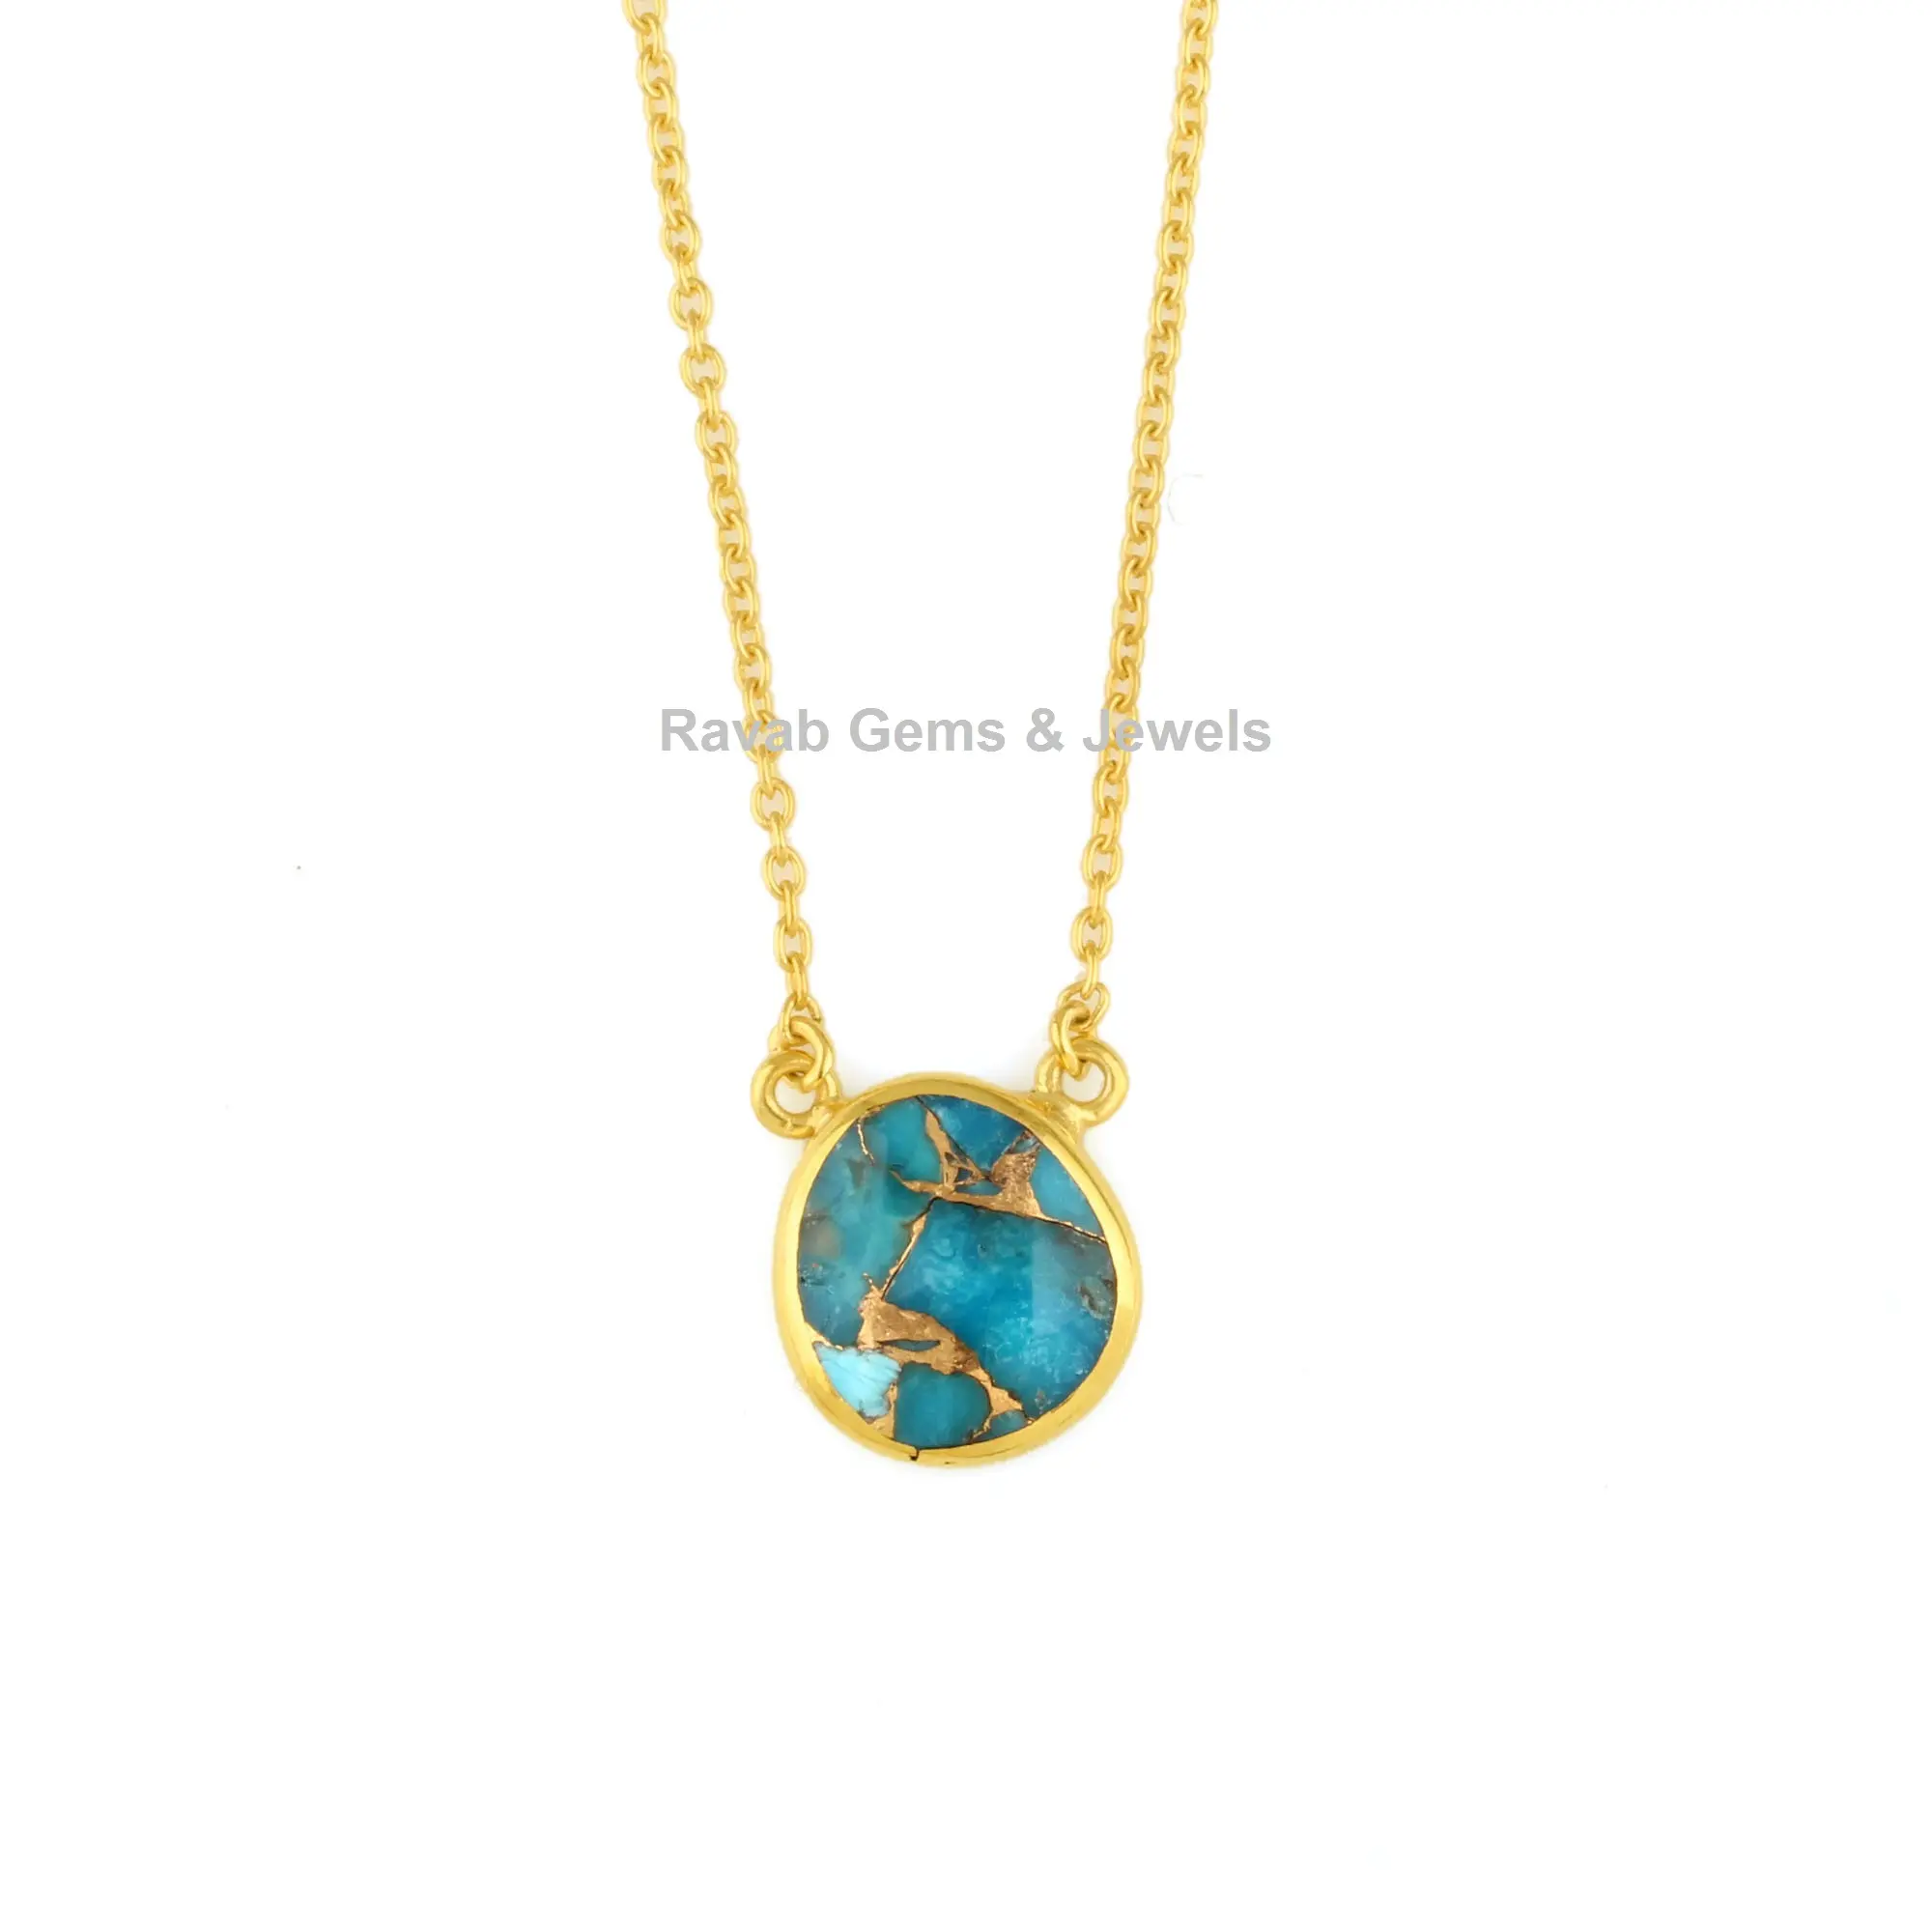 Hot Selling Gemstone Jewelry Natural Blue Copper Turquoise 18k Gold Plated Micron 925 Sterling Silver Chain Necklace For Women